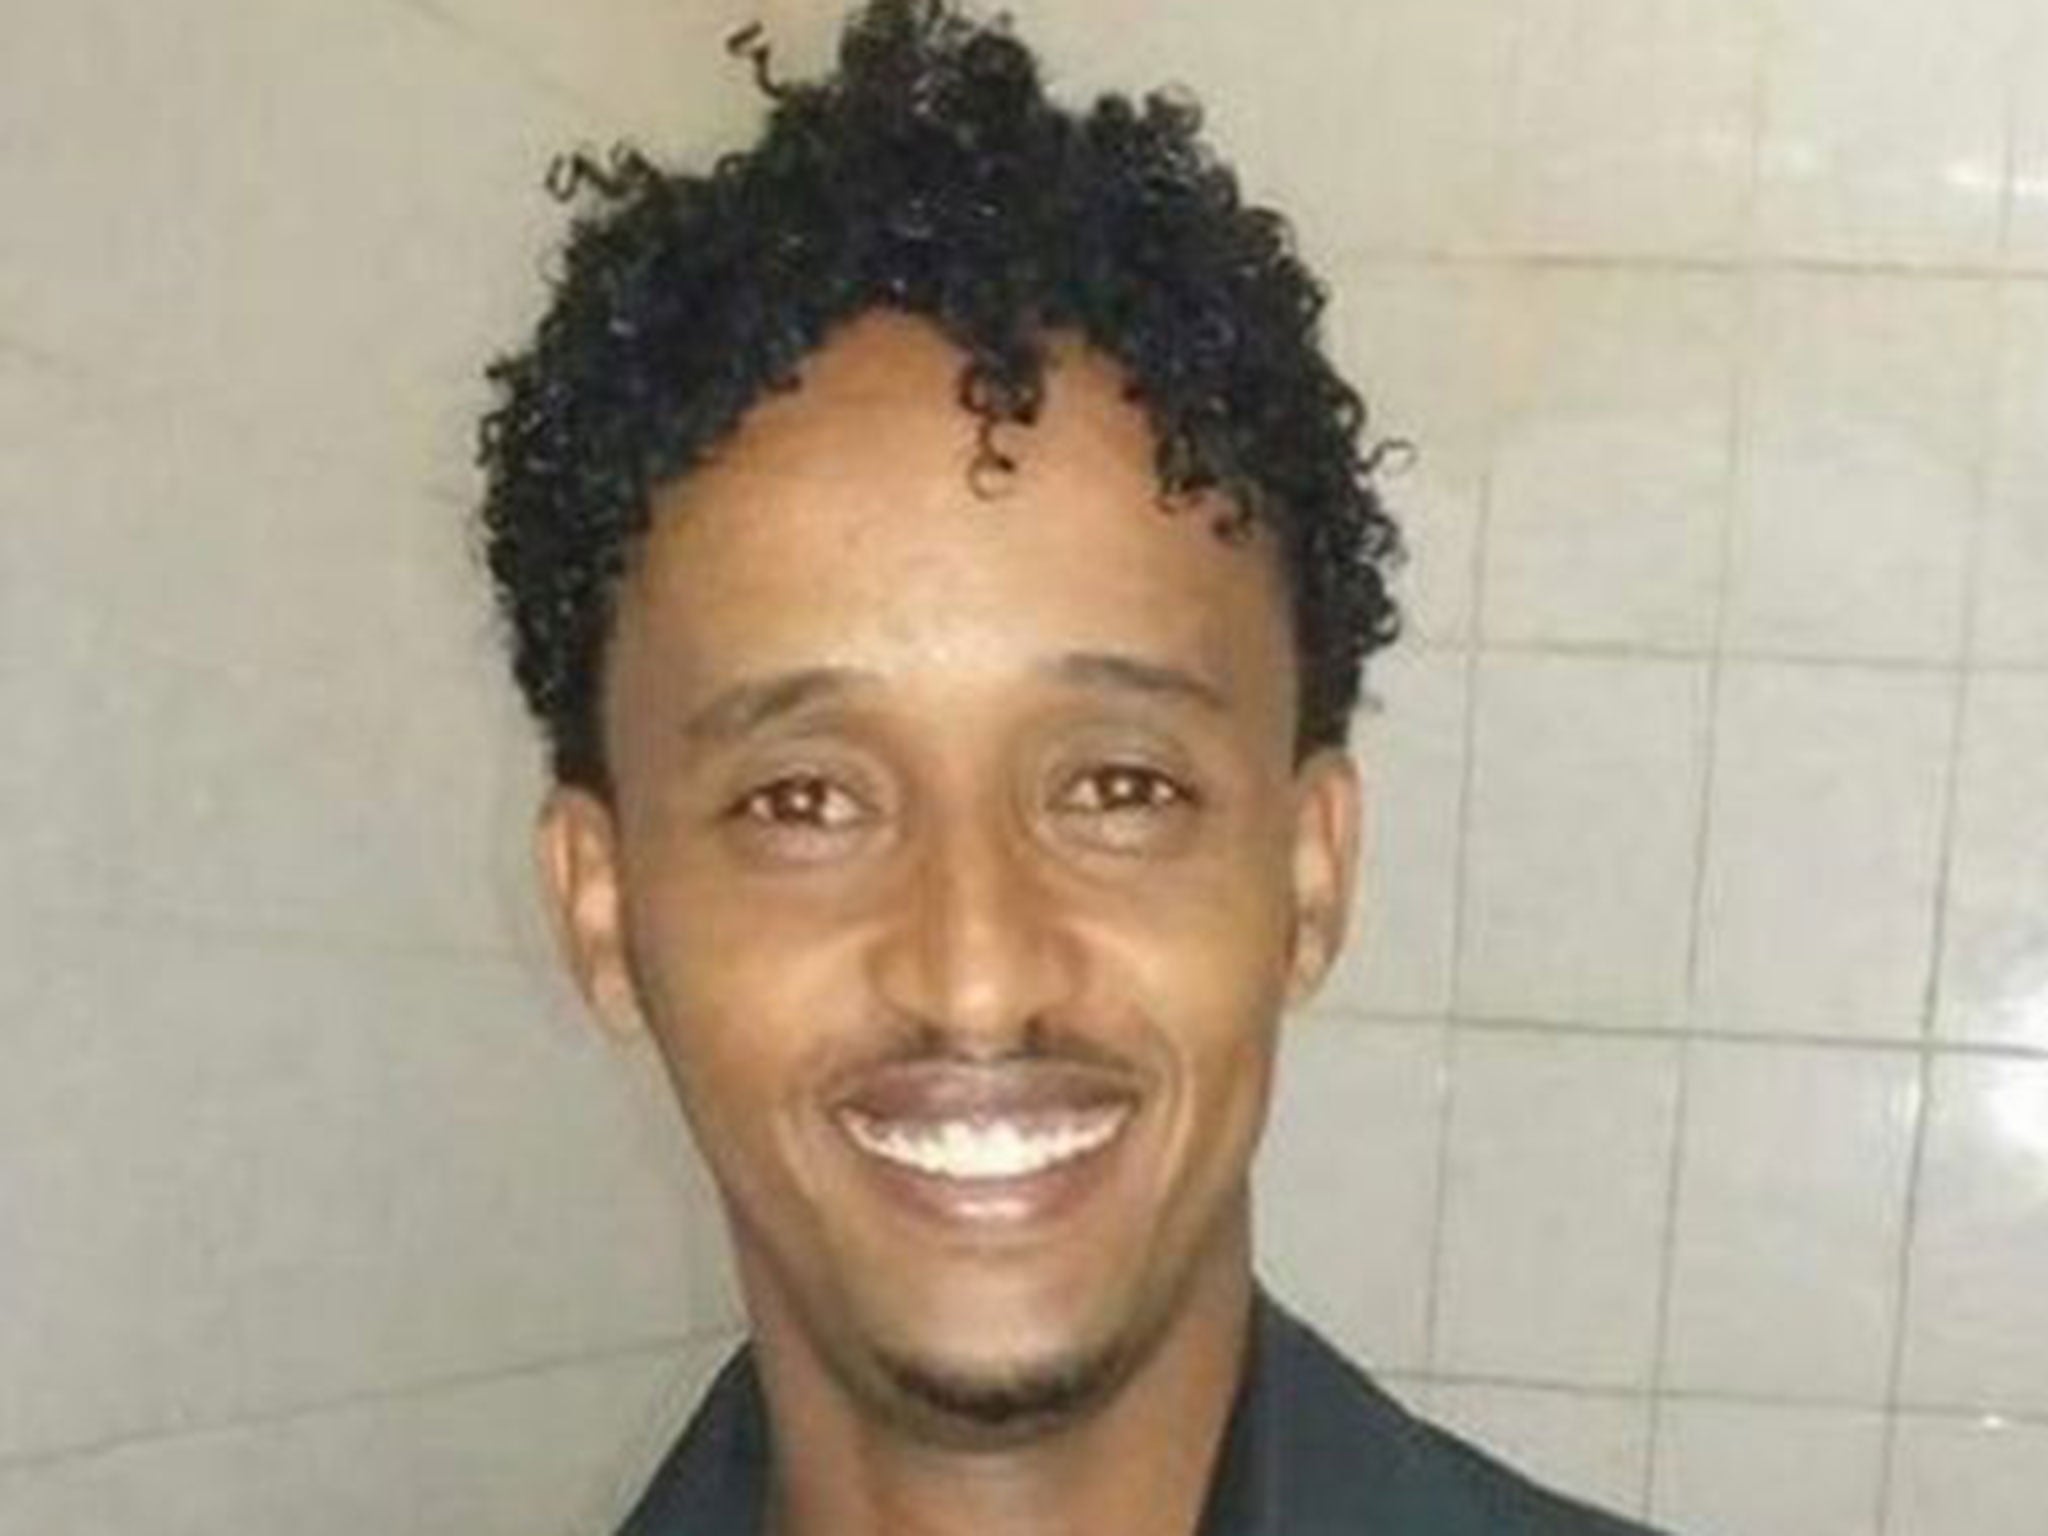 A photo of Medhanie Tesfamariam Berhe, 27, supplied by his family